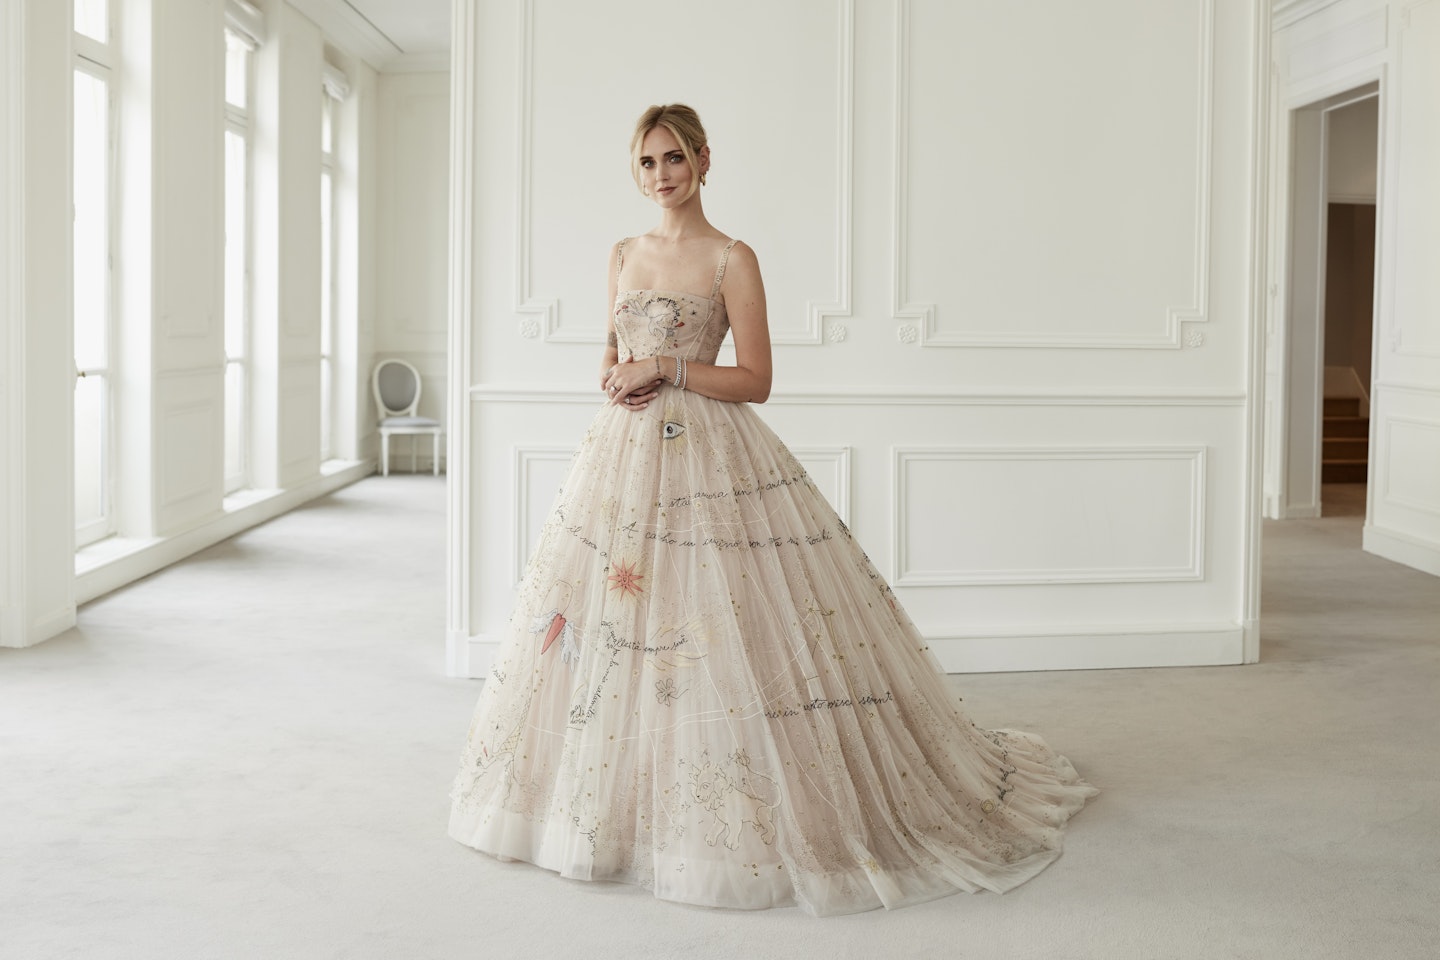 An Exclusive Inside Look At The Making Of Chiara Ferragni's Epic Wedding  Dress(es)